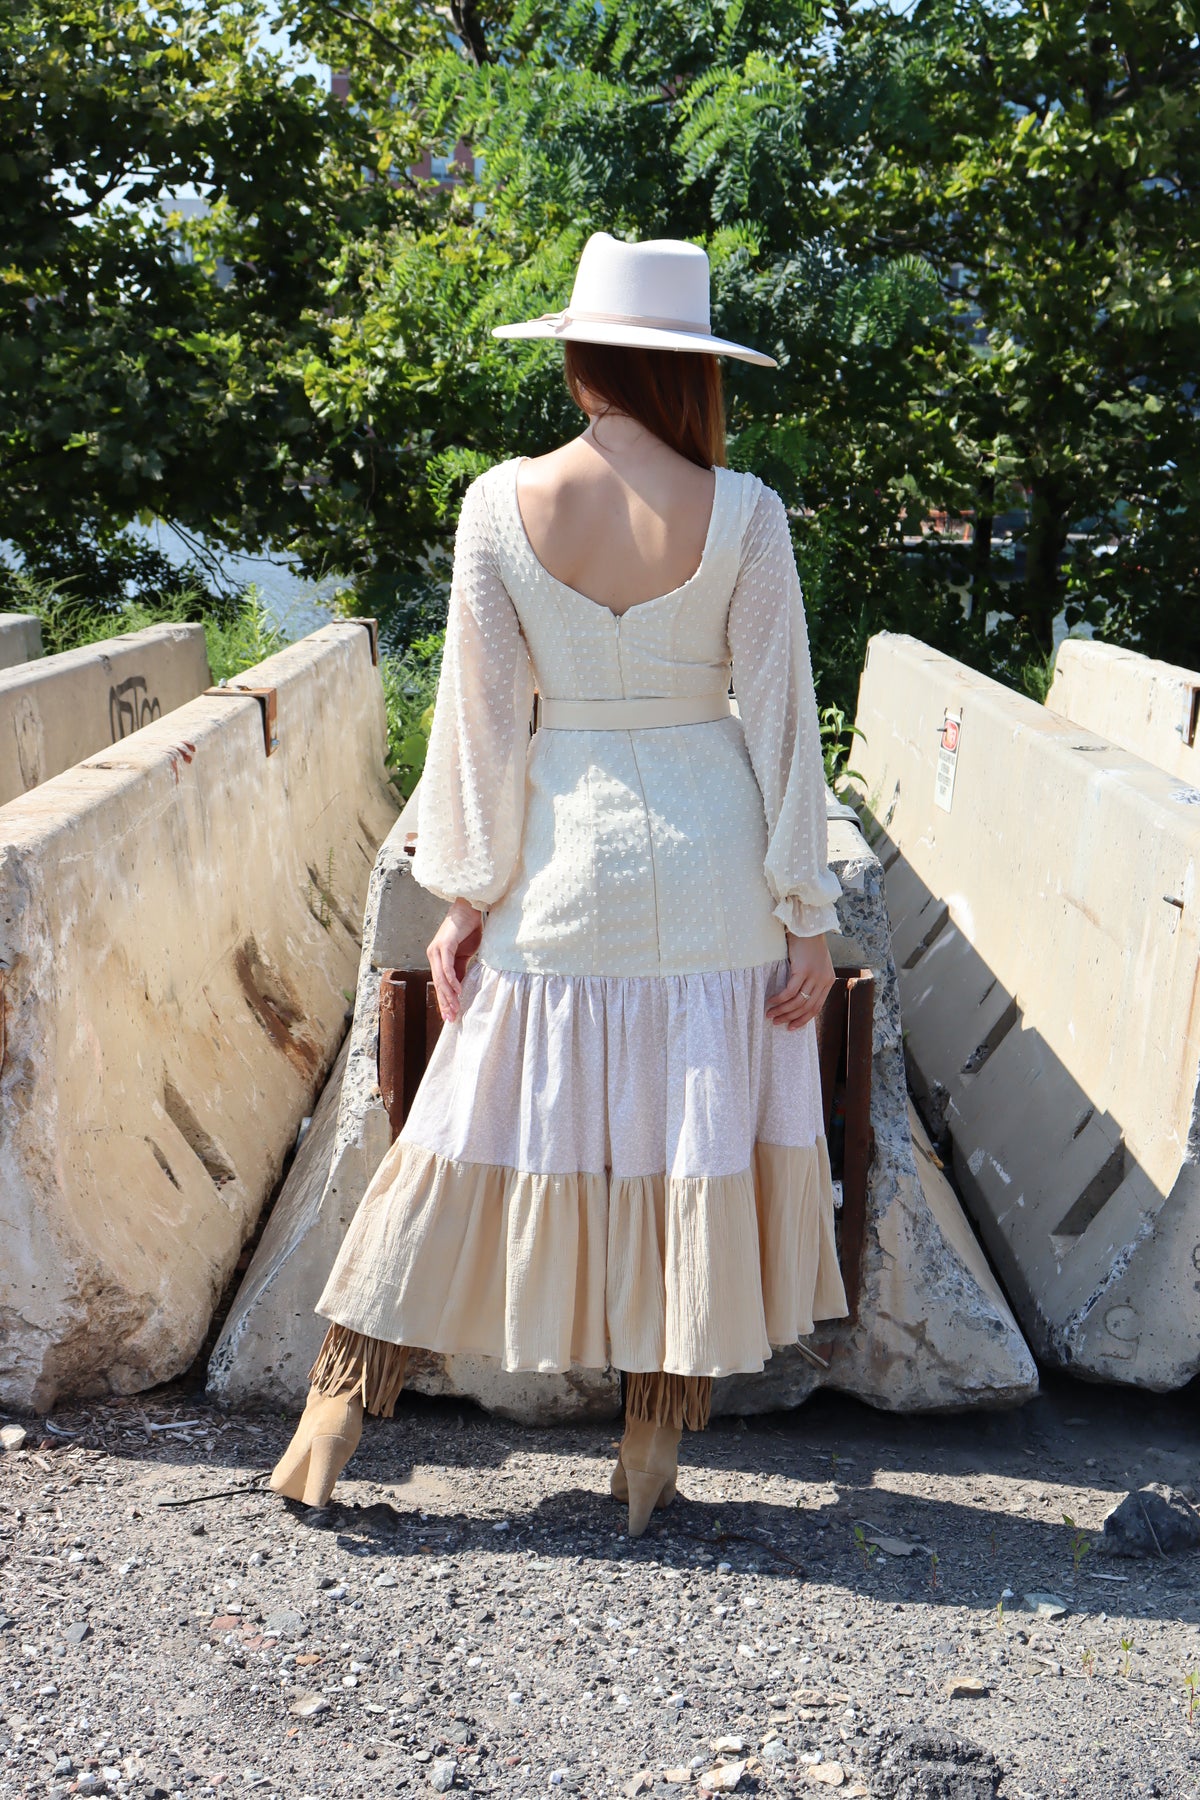 Back of model wearing dress with three different fabrics, Swiss Dot, Calico and Gauze midi dress, a belt and hat.